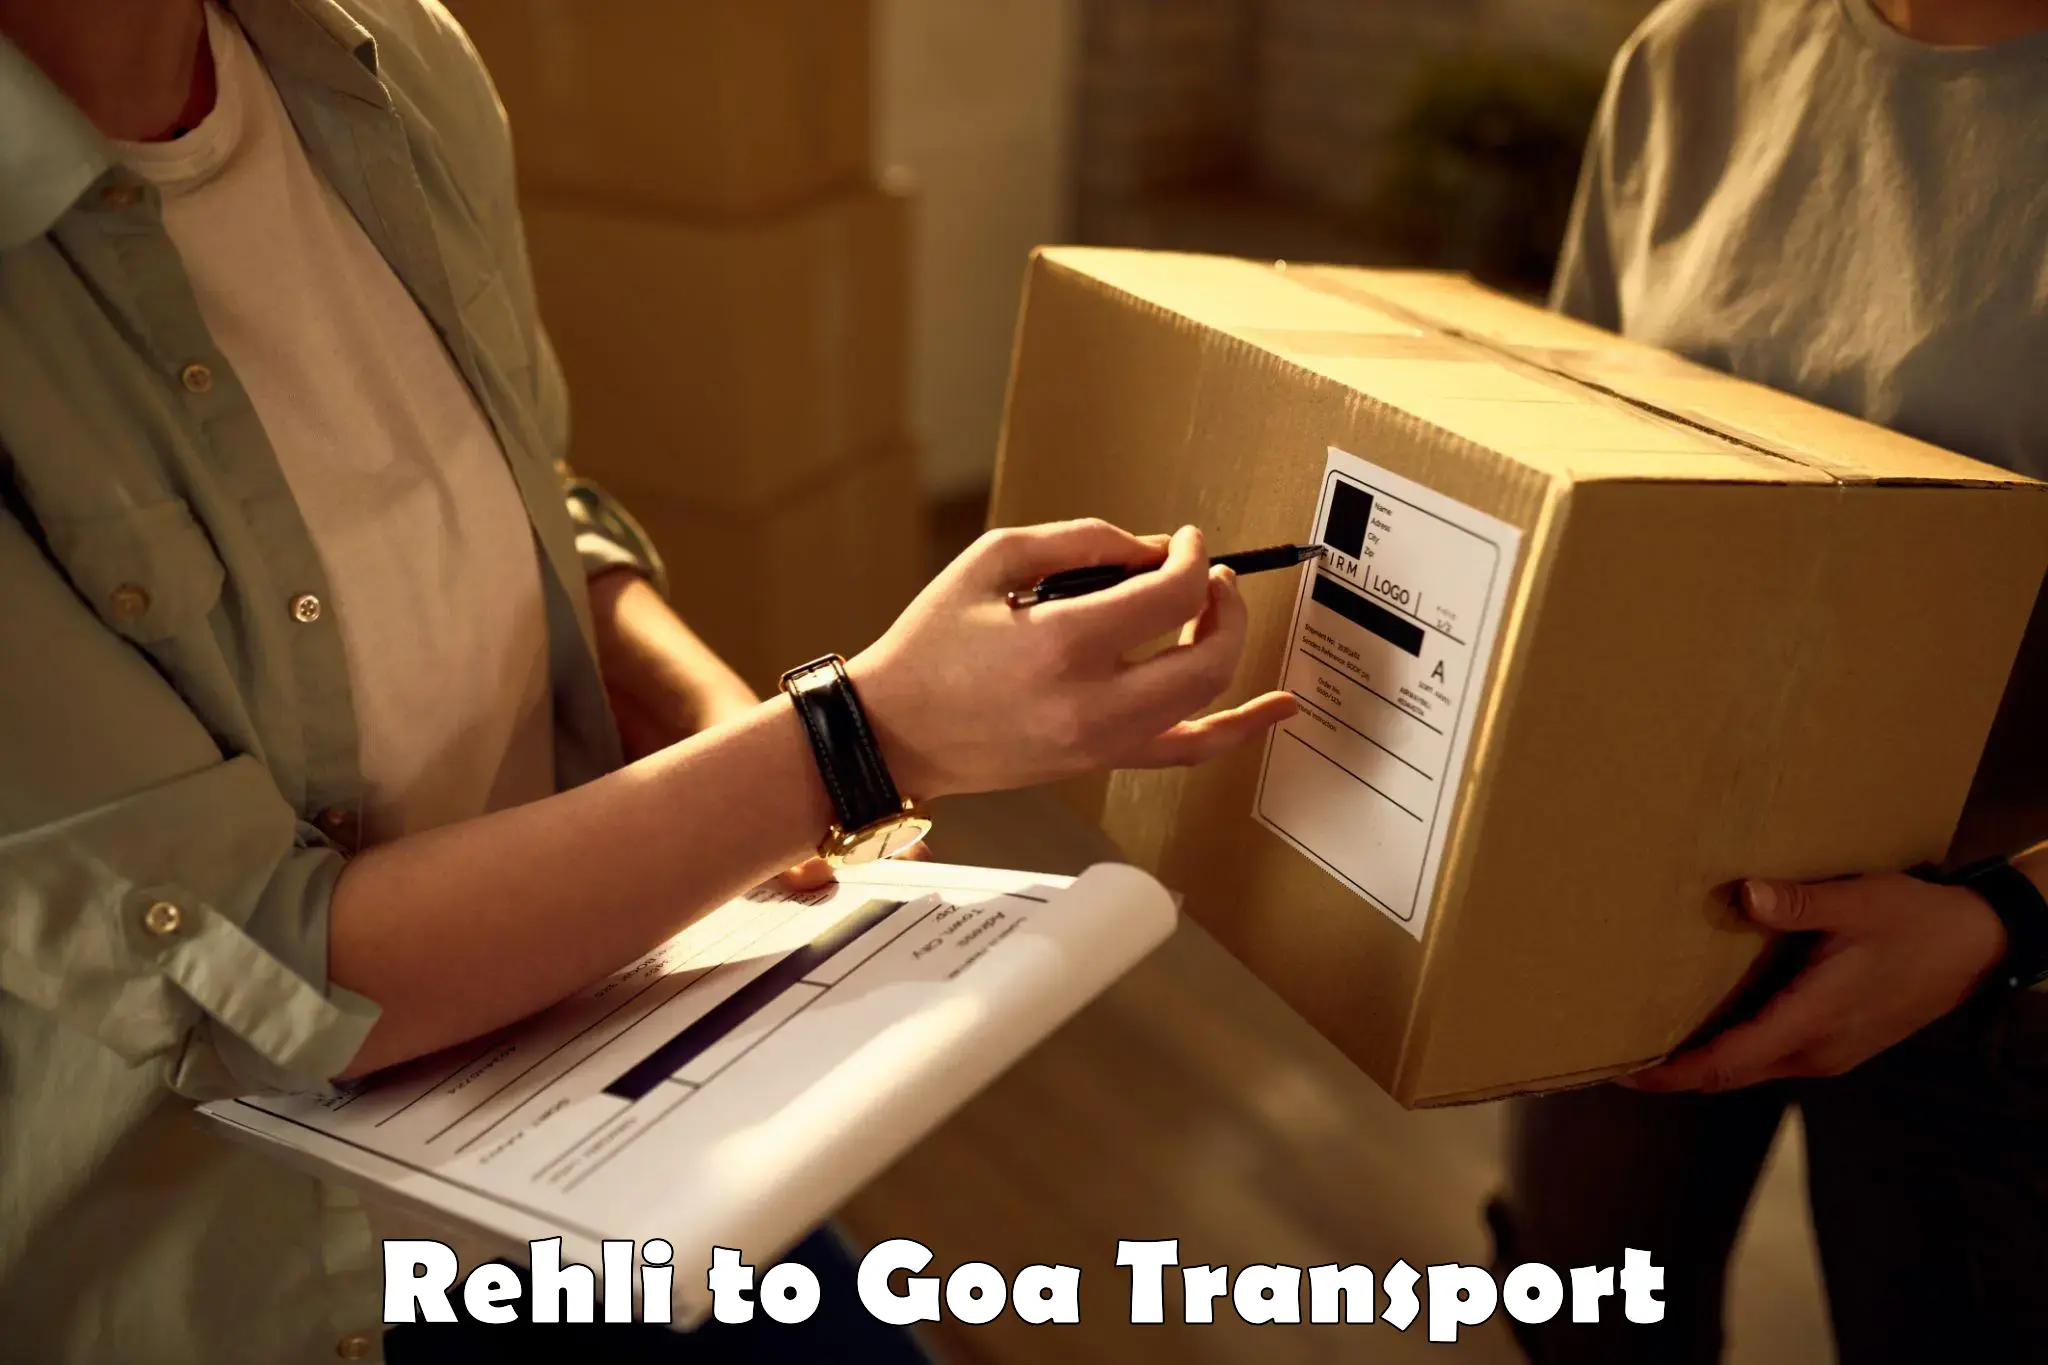 Transport bike from one state to another in Rehli to Vasco da Gama